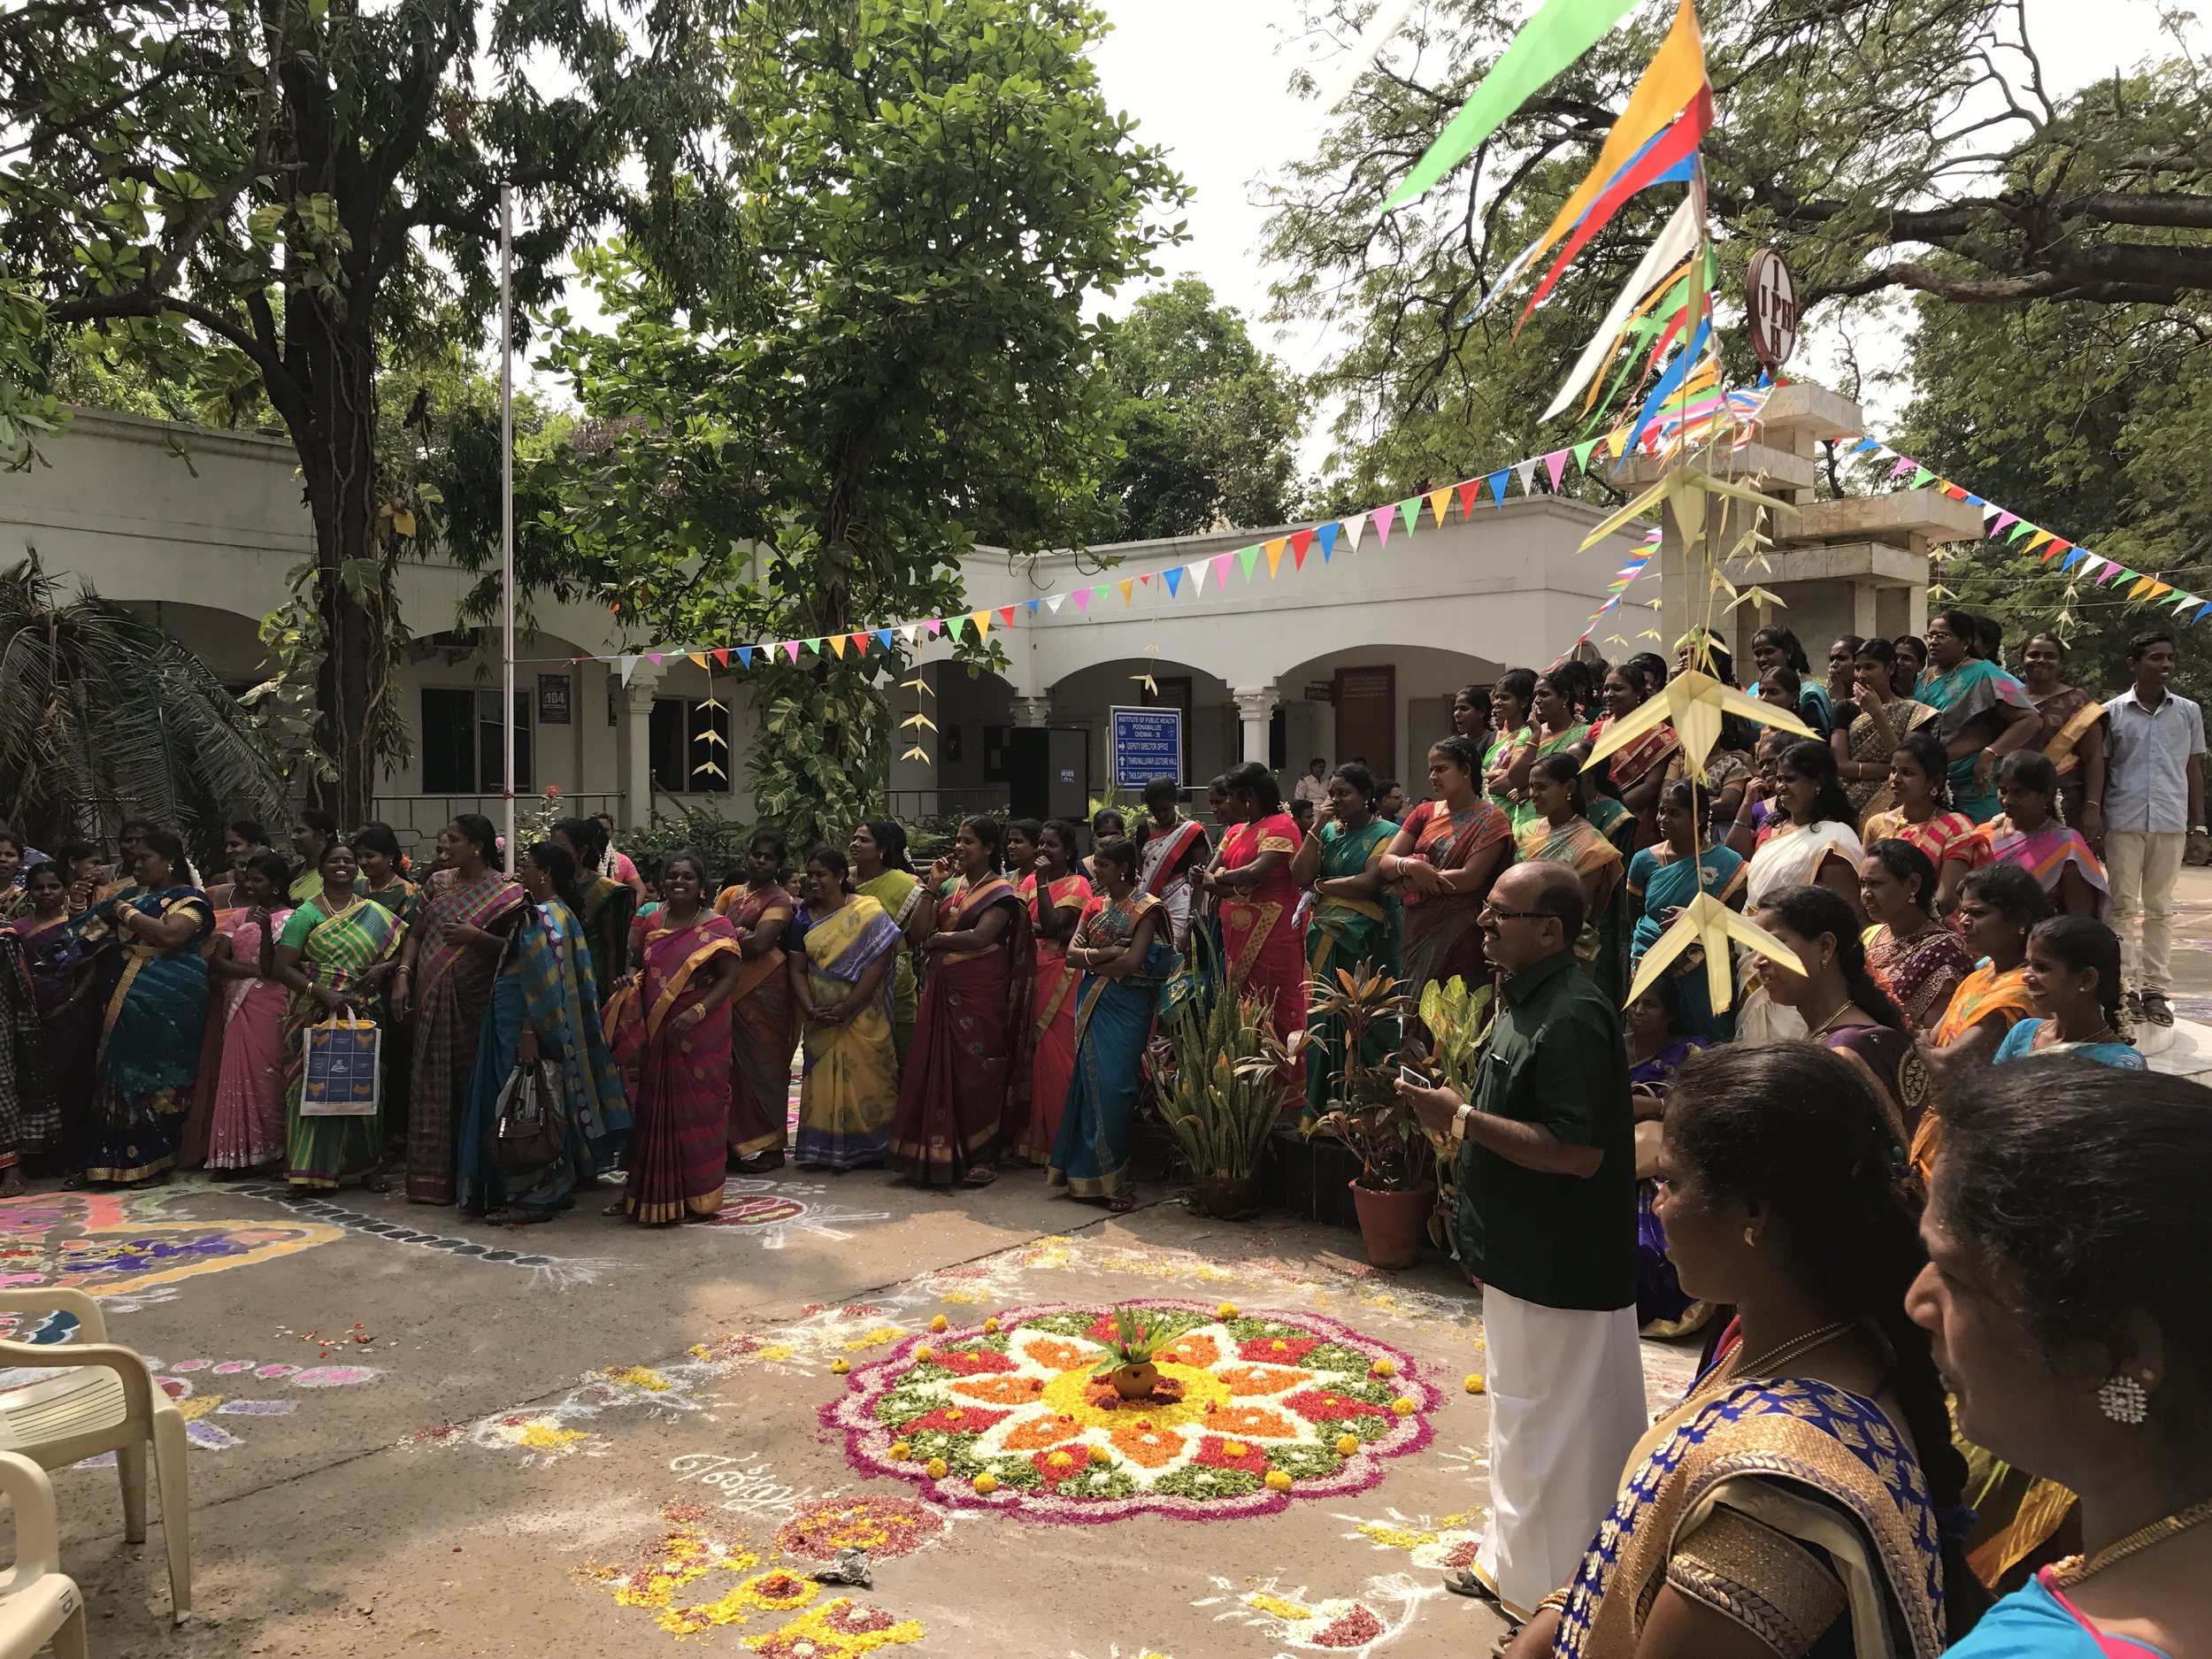  At the Institute of Public Health (IPH) in Poonamallee, nurses and staff participate in celebrations for the annual Pongal festival, celebrating the year's harvest. 